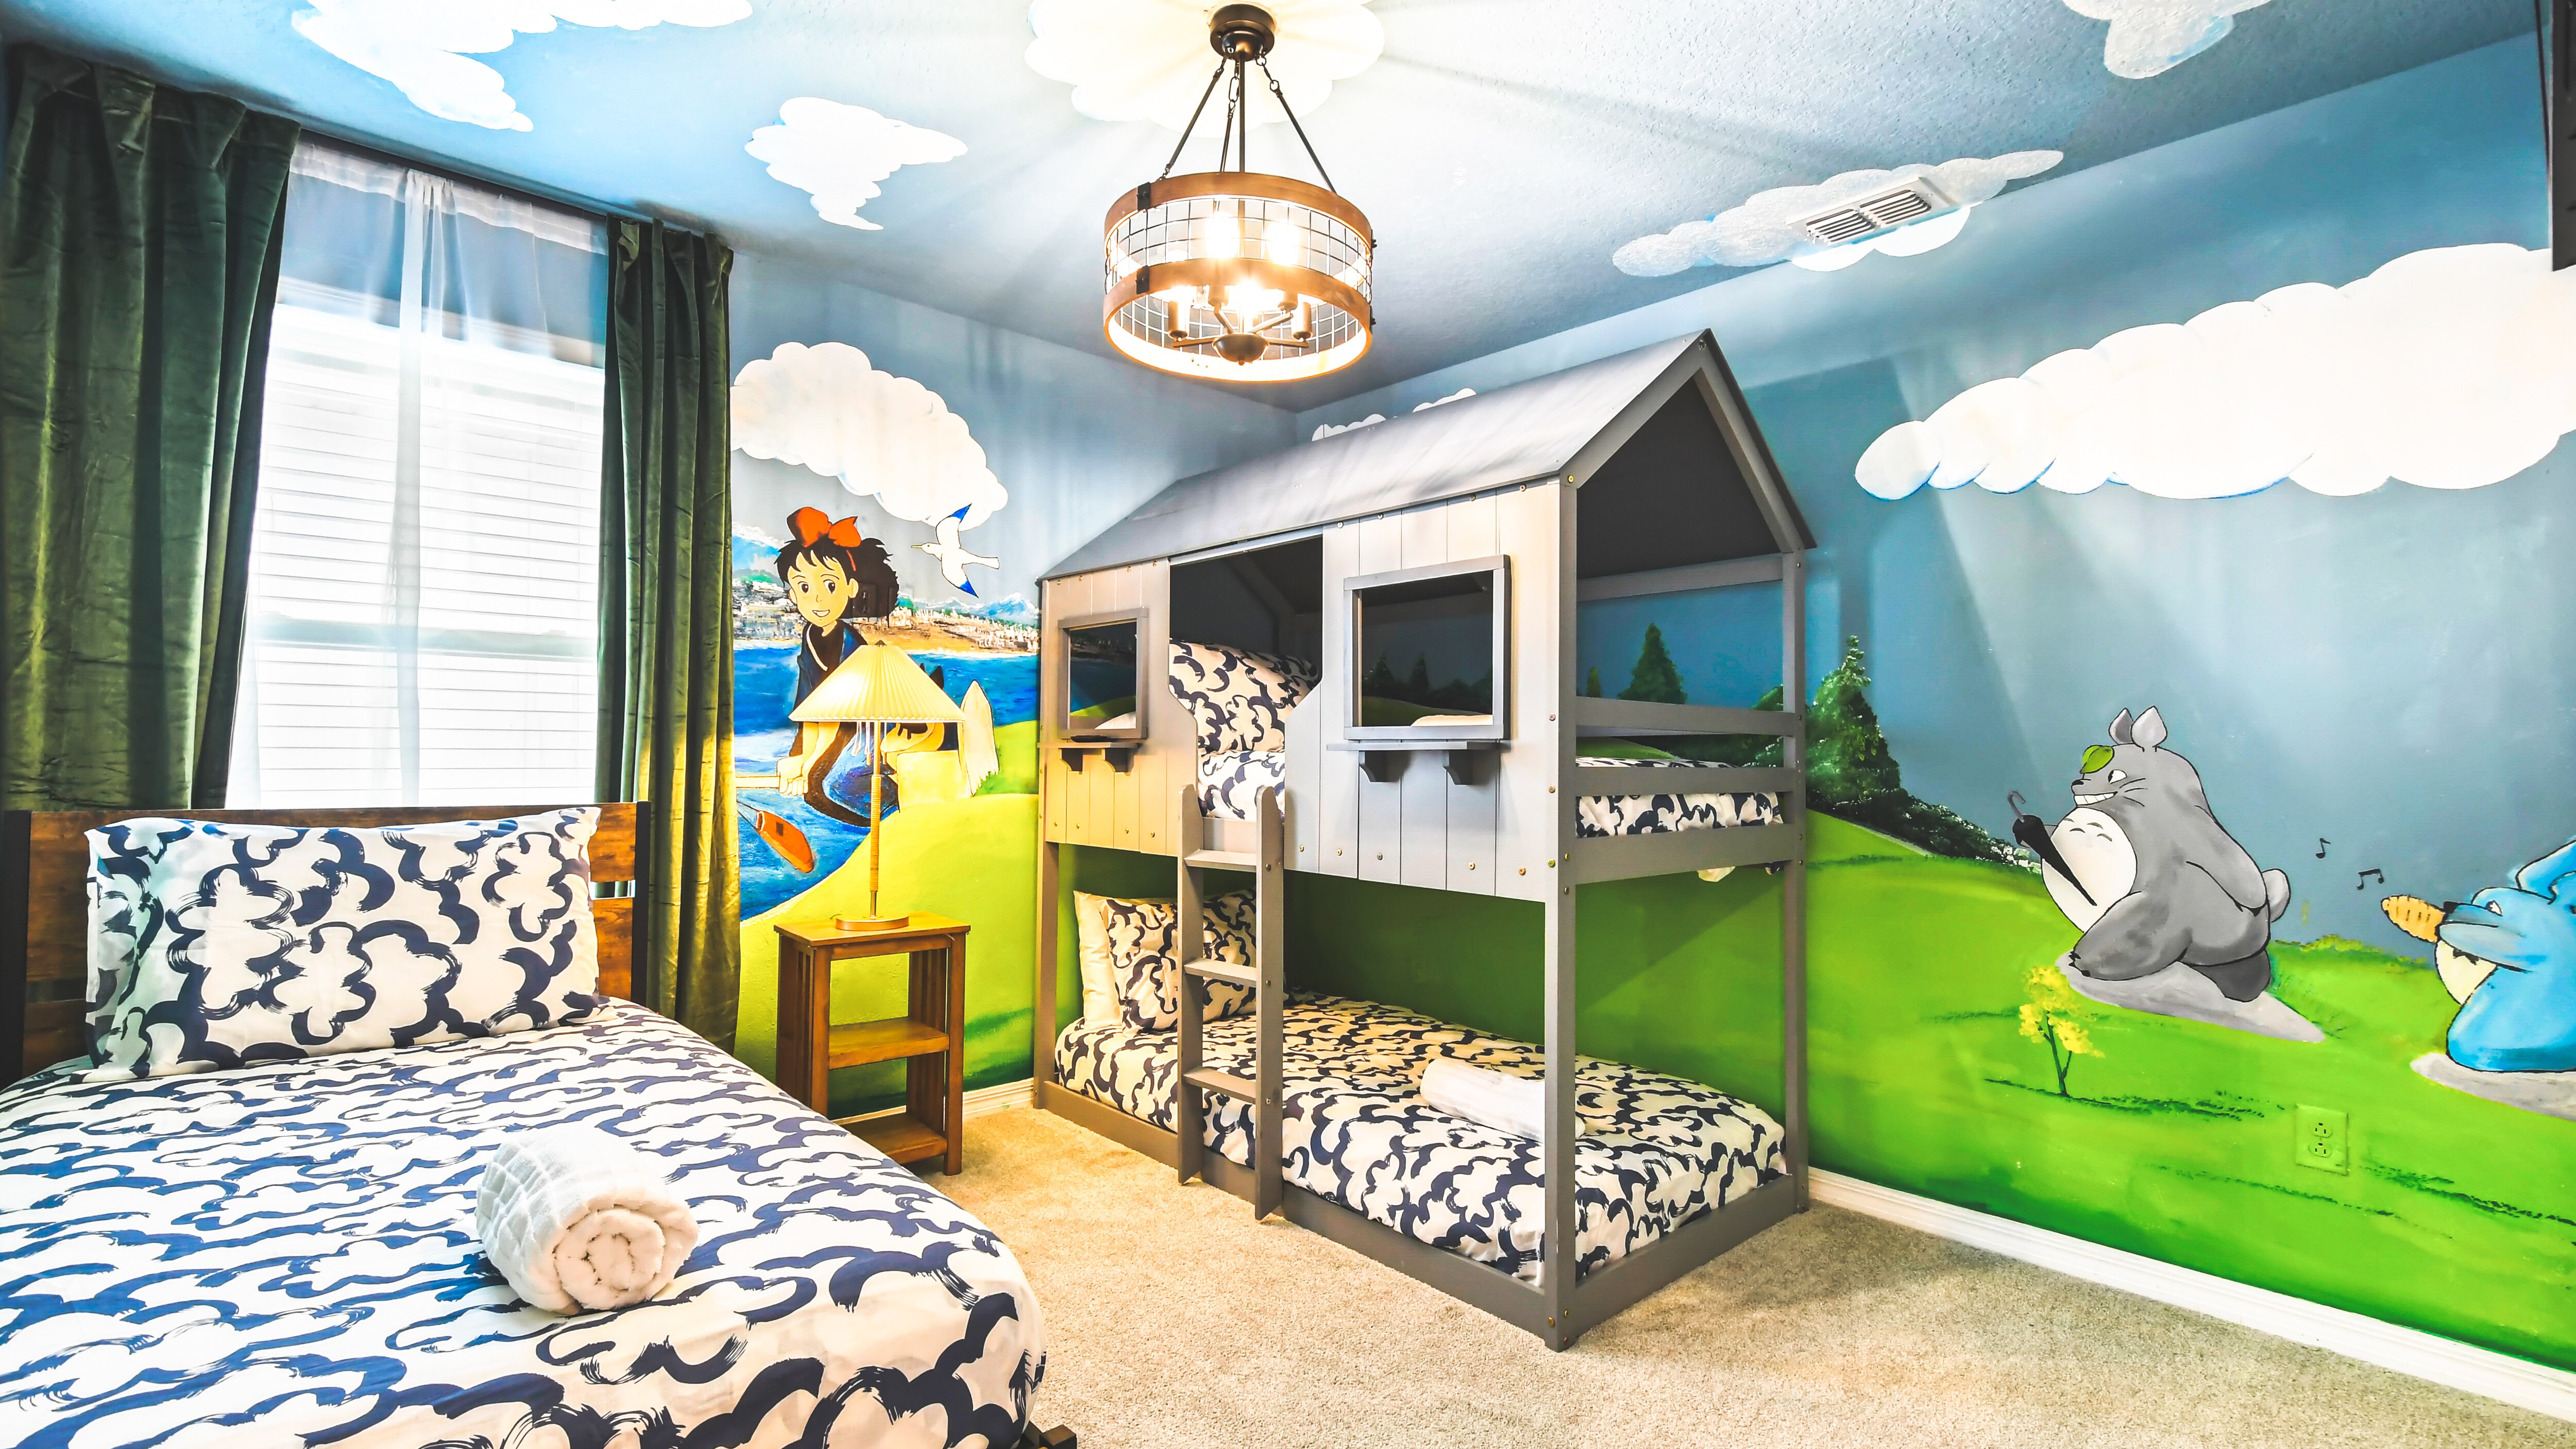 Charming children's room with twin and bunk beds, creating a playful sleepover-friendly space